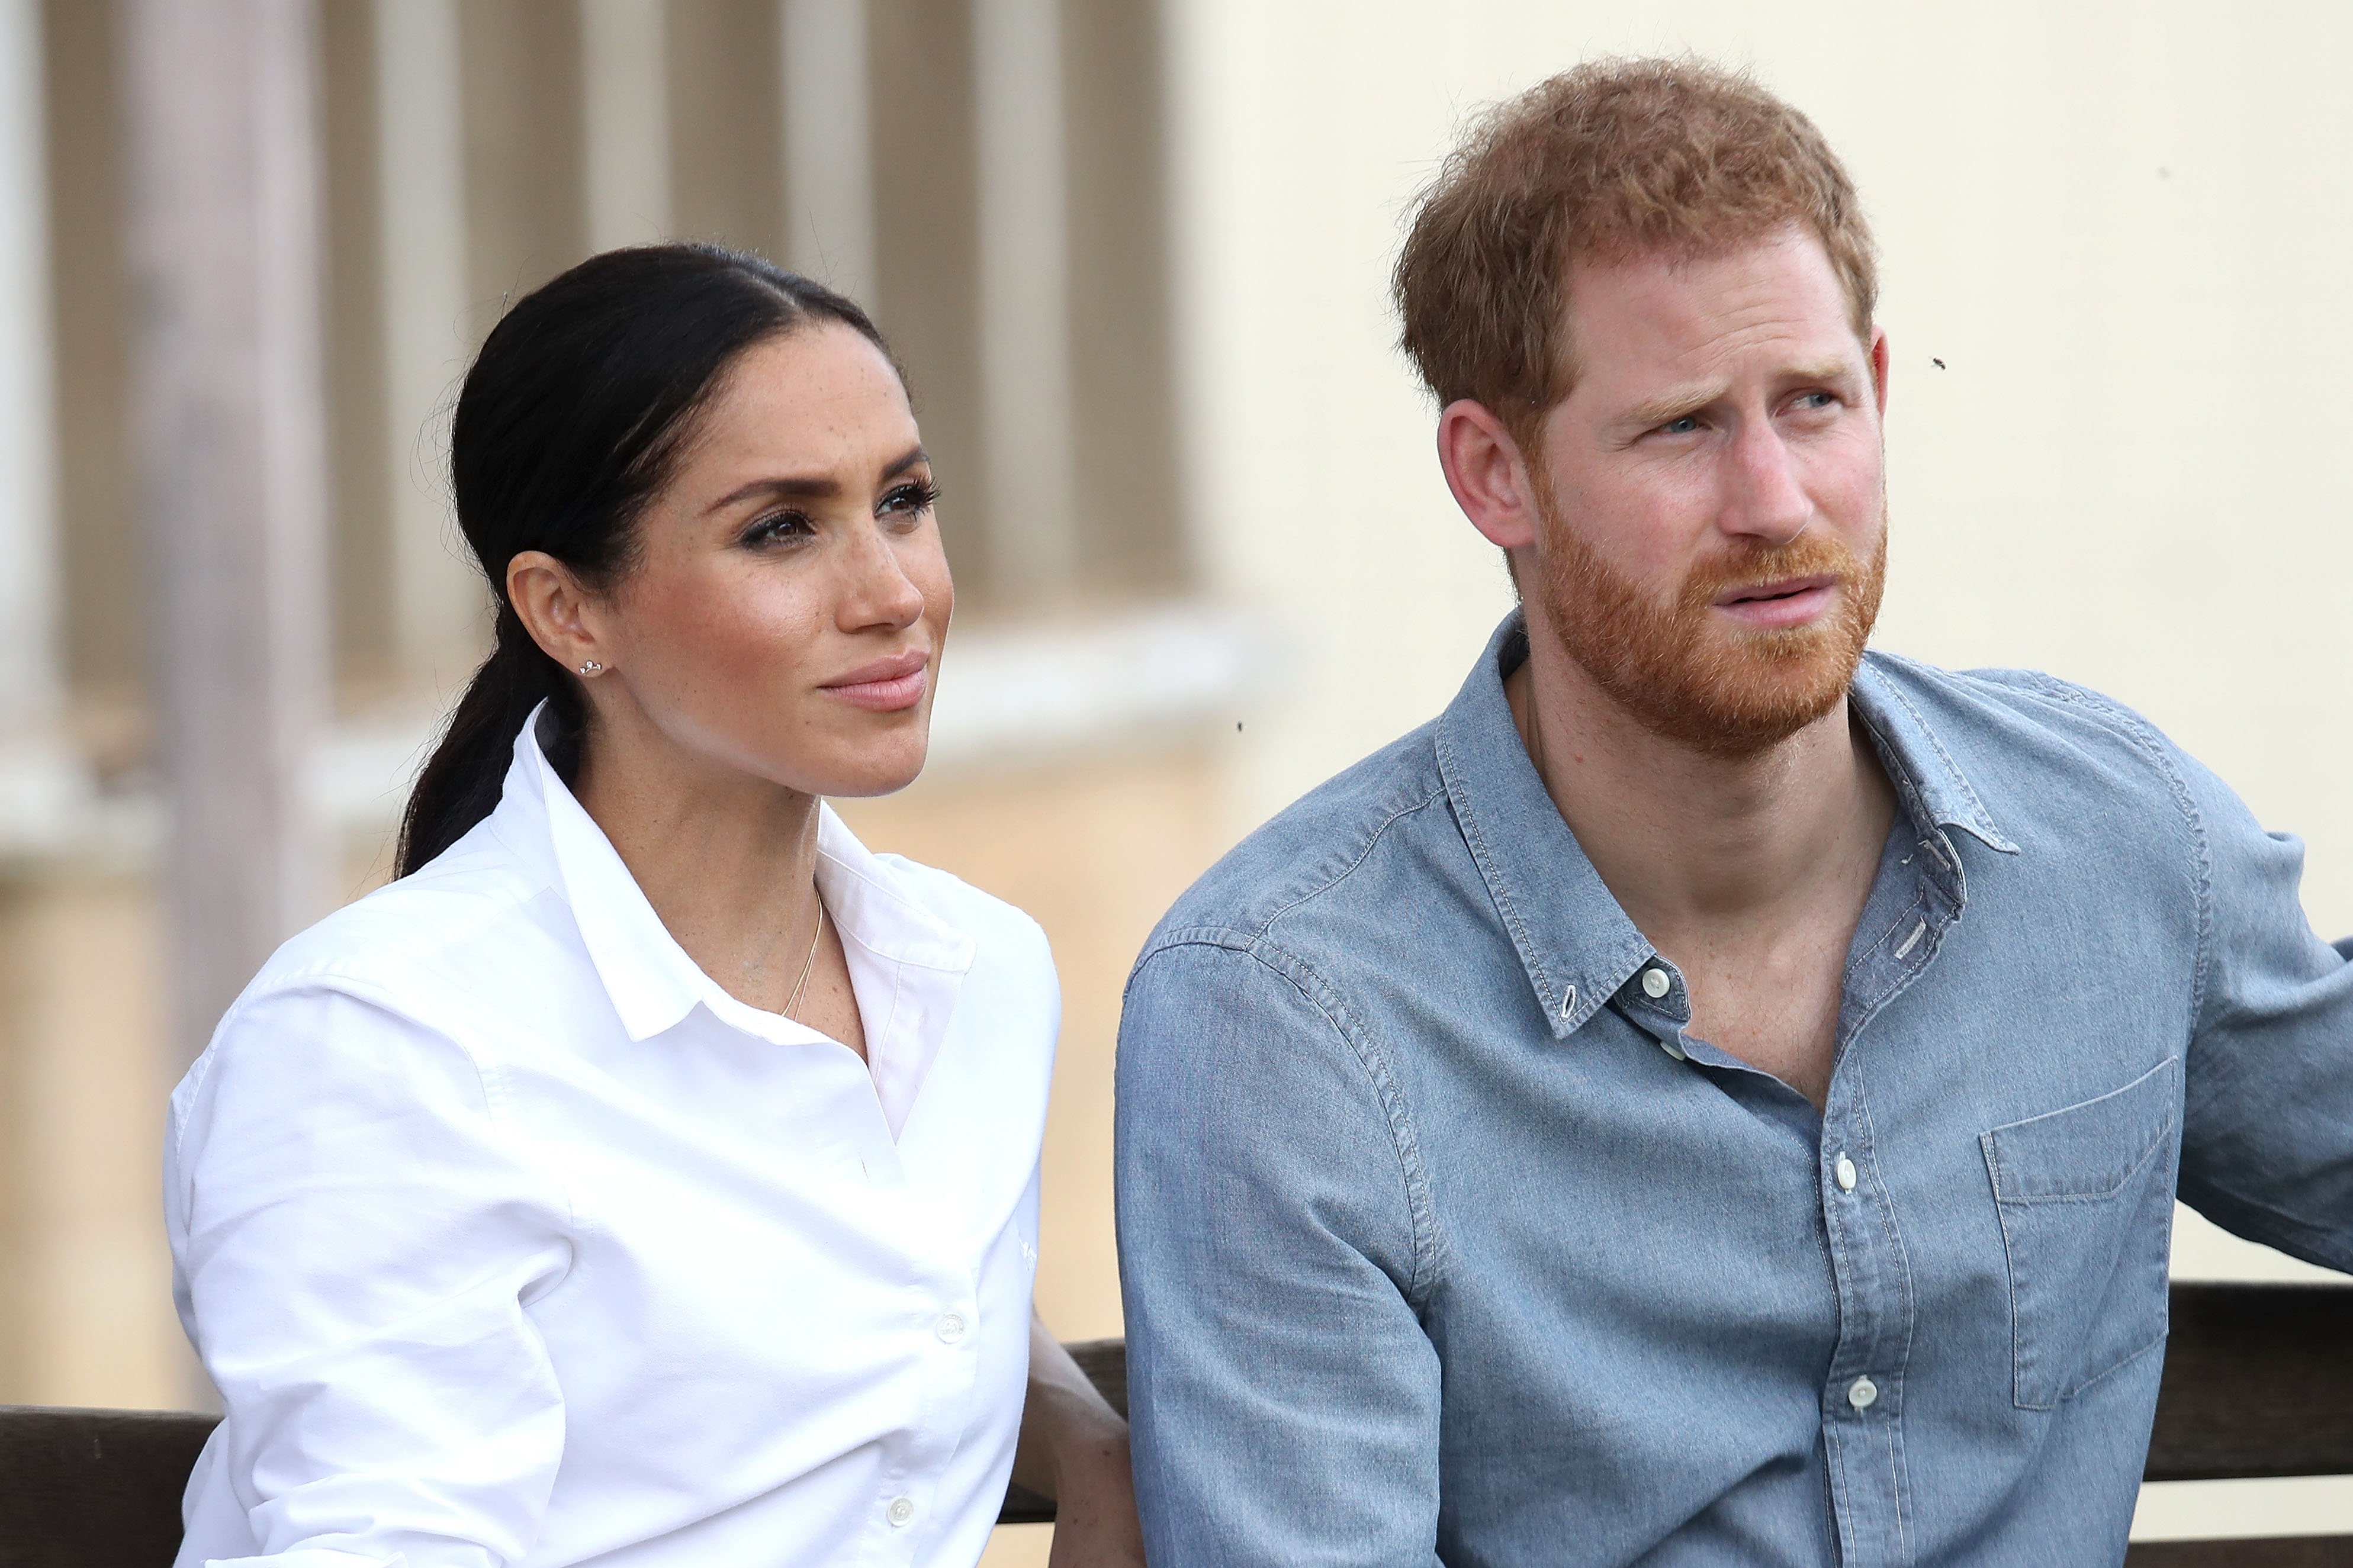 Prince Harry and his wife Meghan Markle visiting a local farming family, the Woodleys, on October 17, 2018 in Dubbo, Australia. / Source: Getty Images